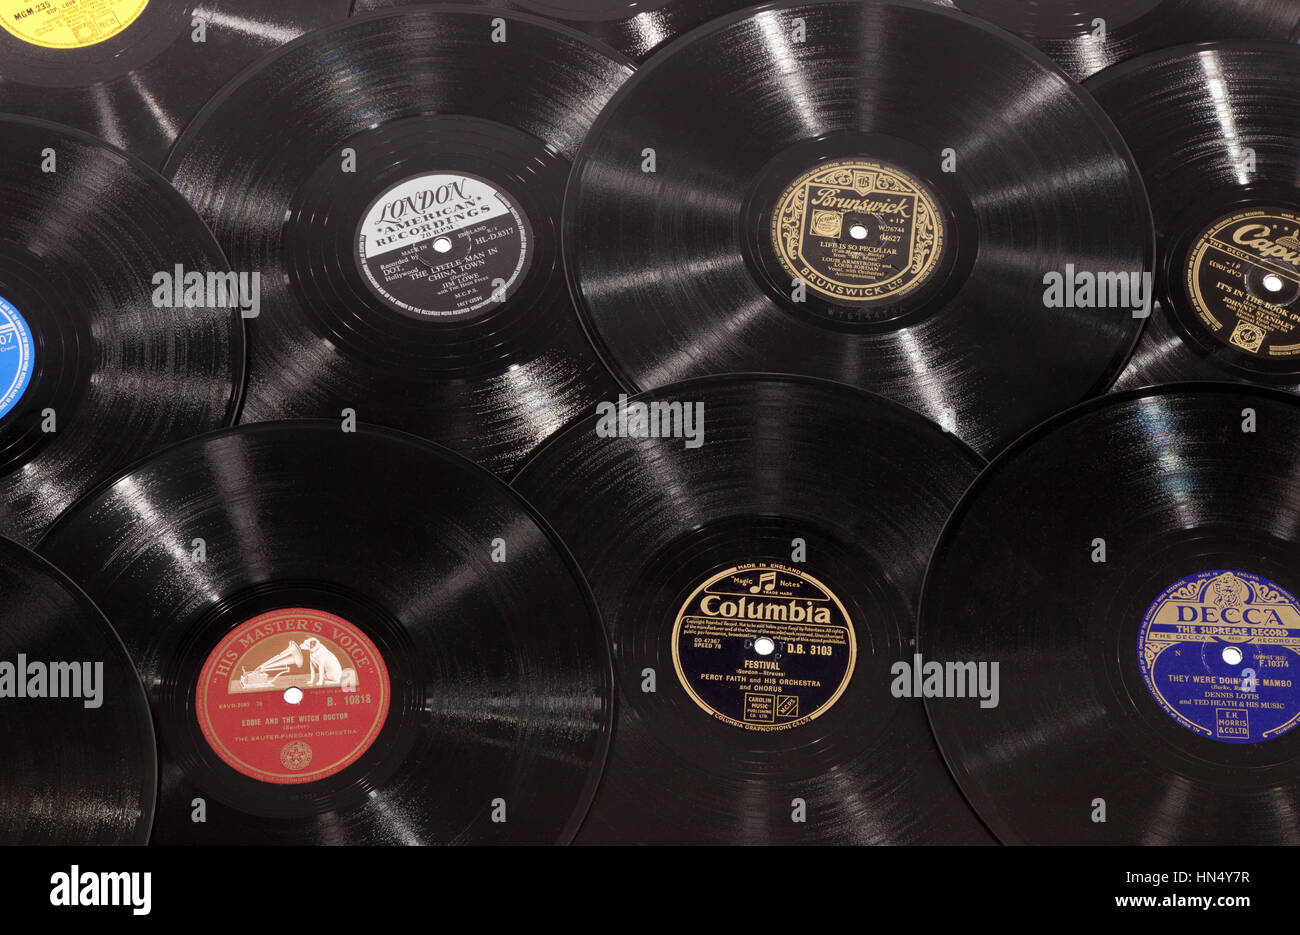 A selection of old 78rpm vinyl records Stock Photo